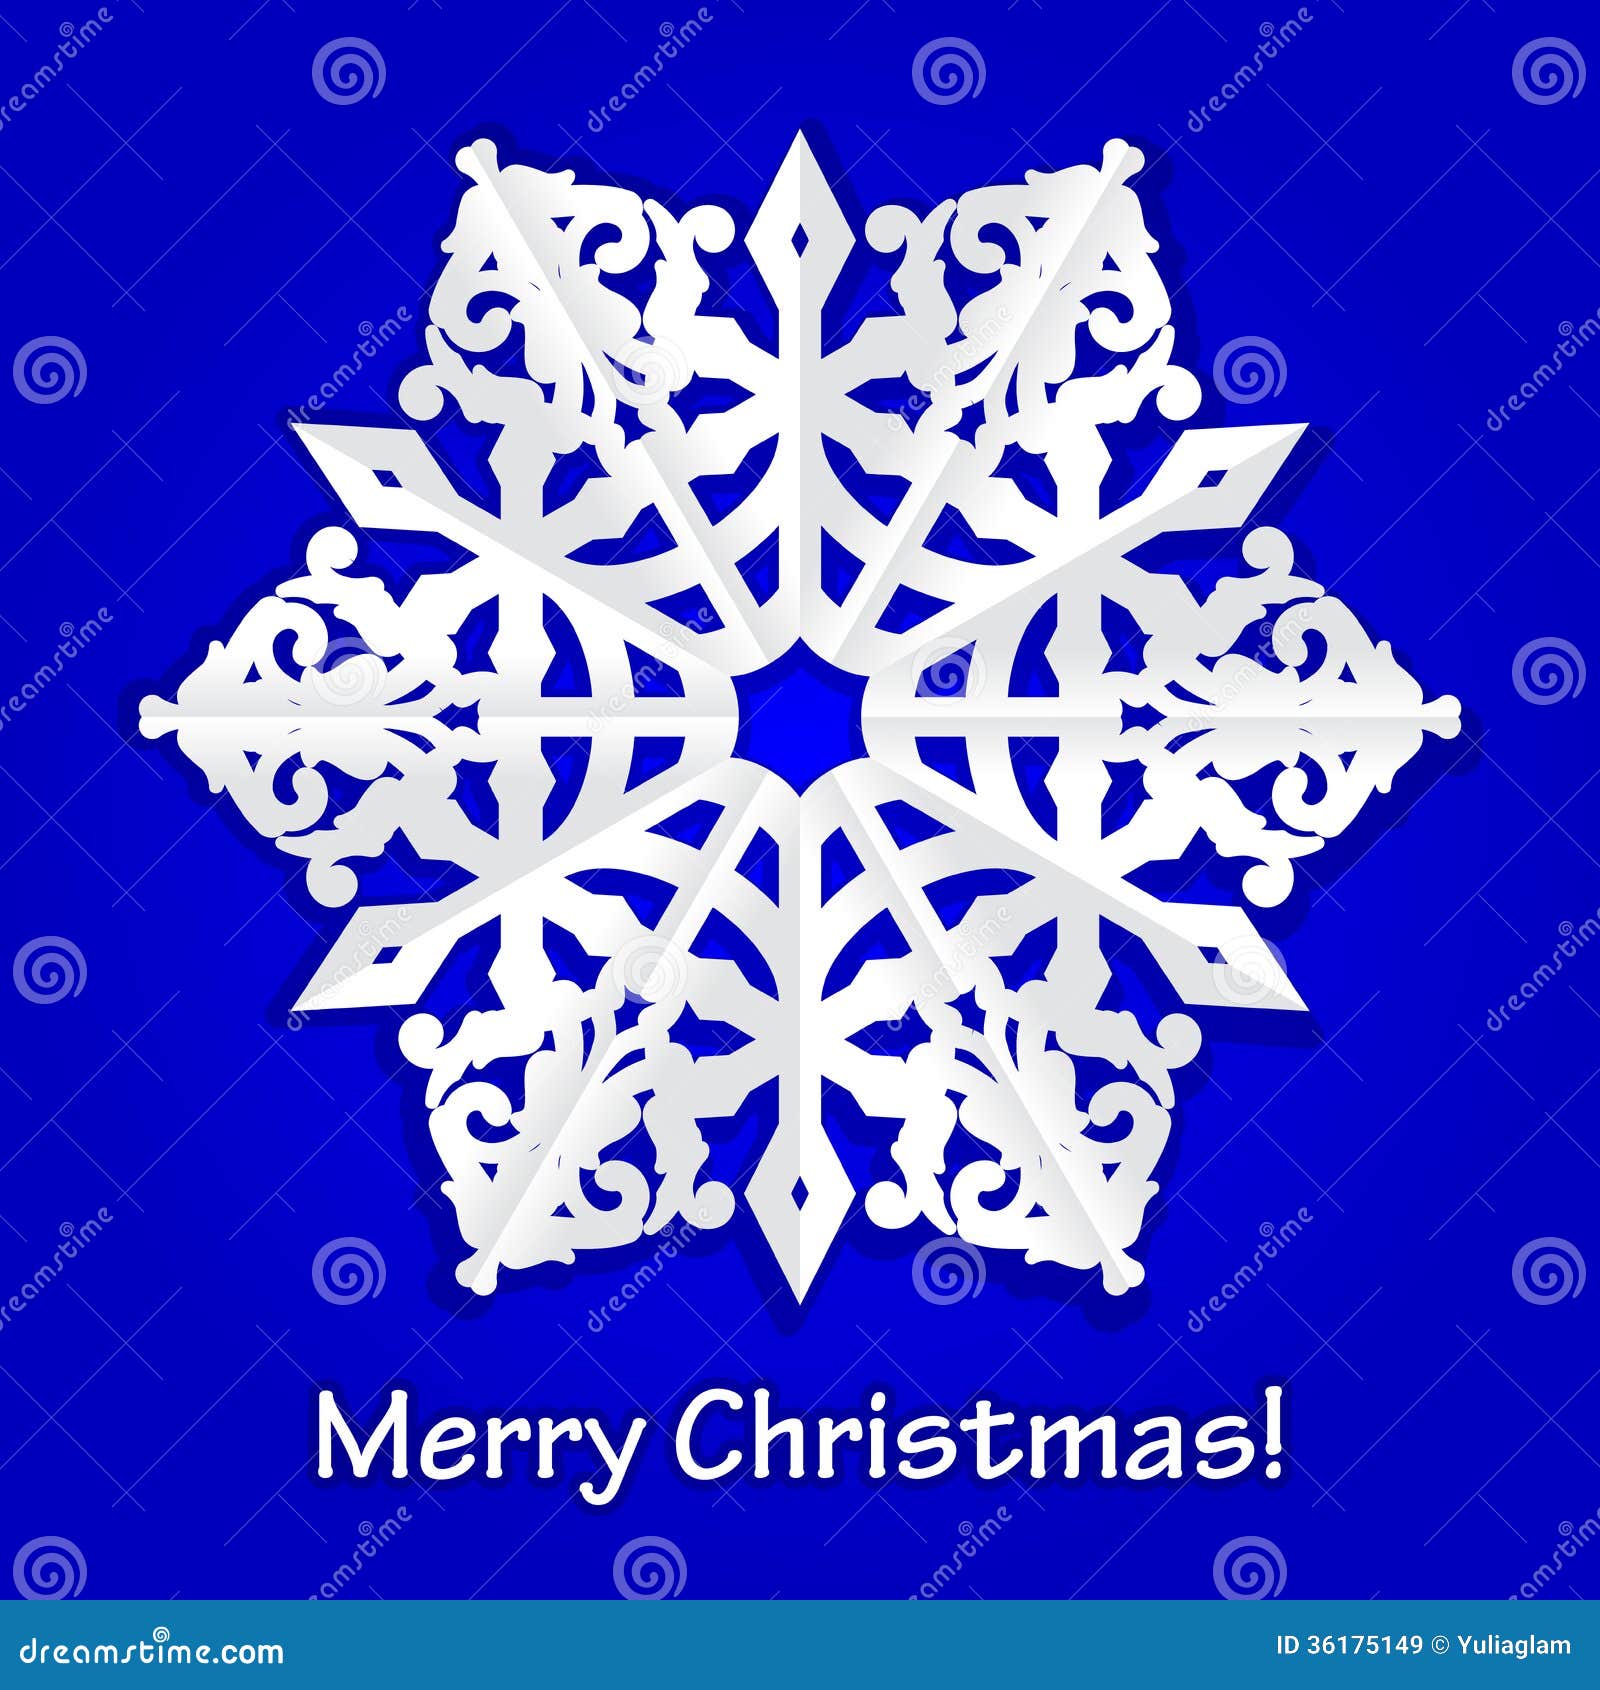 Merry Christmas Background with Paper Snowflake Stock Vector ...